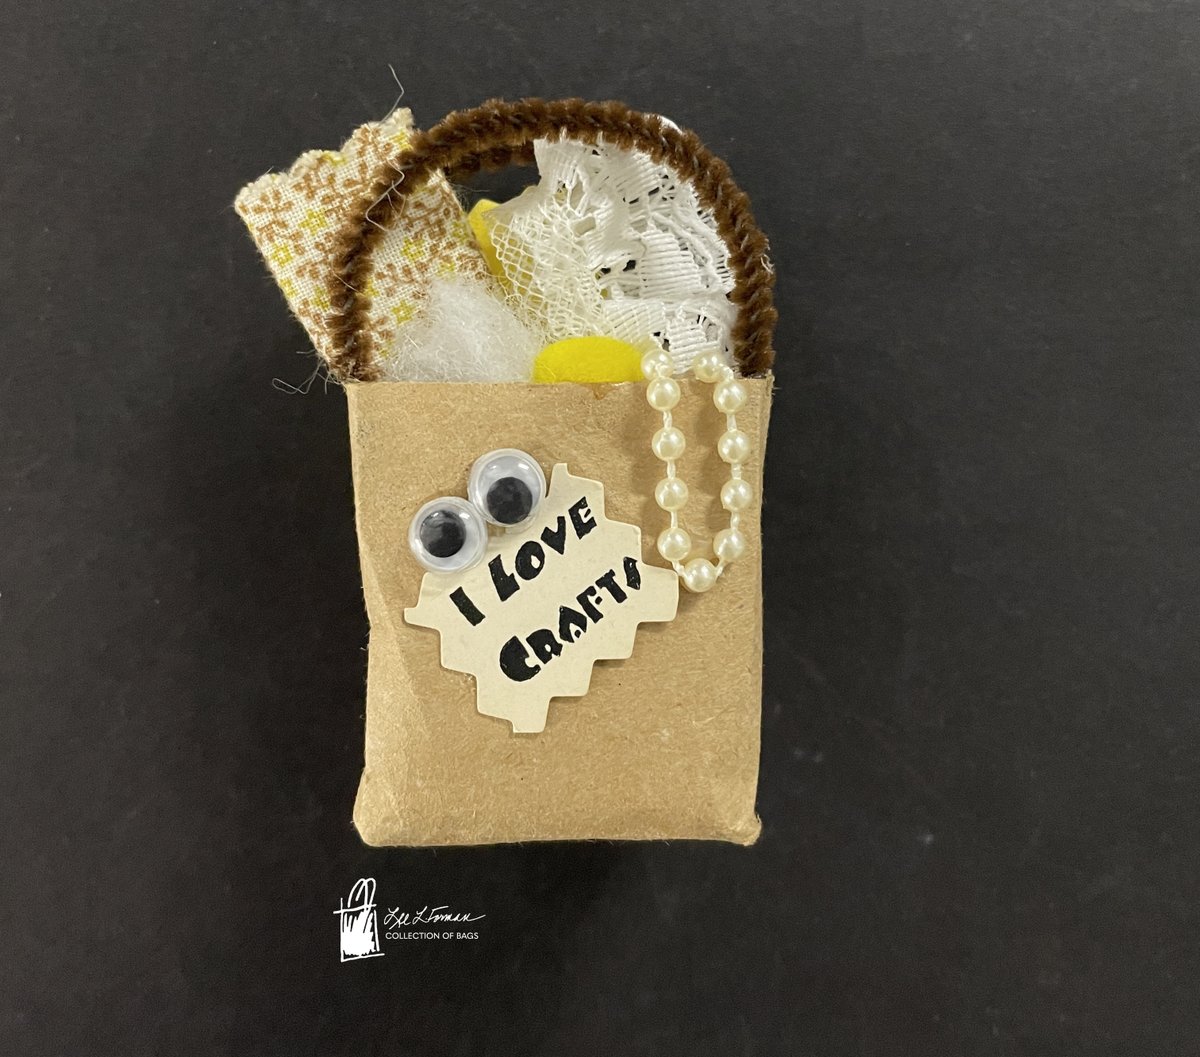 104/365: This friendly miniature magnet bag with its pair of googly eyes and pipe cleaner handle is filled with a mix of craft supplies and a message proclaiming that 'I love crafts.' Adding to its sentiment of crafting joy, the arrangement appears to be handmade. 